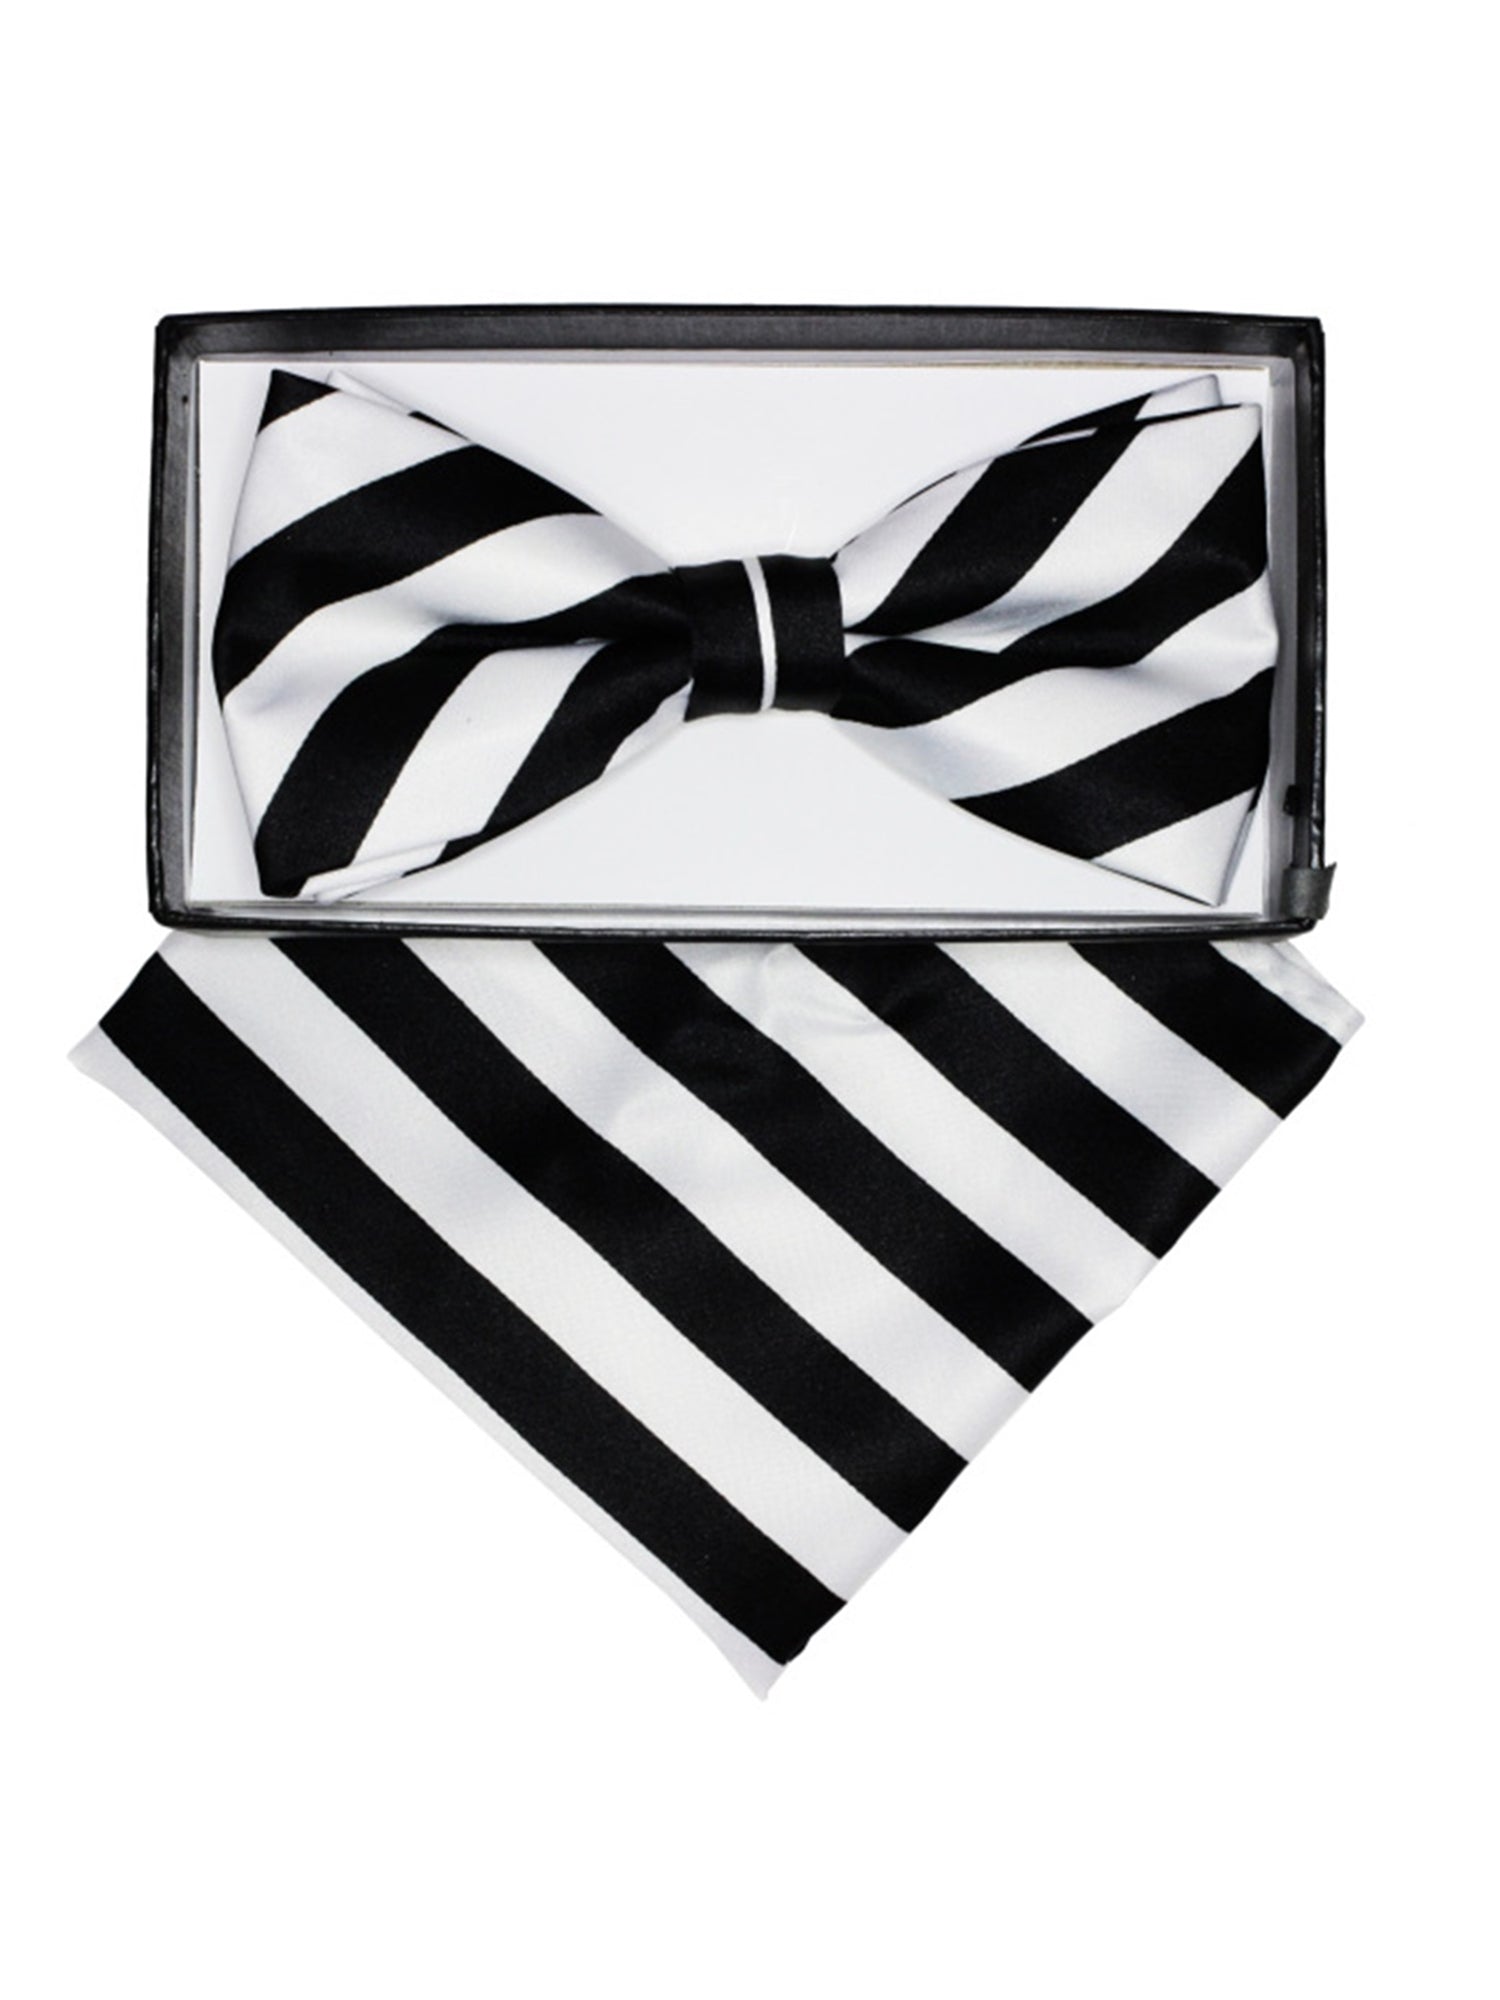 Men's Stripes Pre-tied Adjustable Bow Tie With Hanky Bow Tie TheDapperTie Black & White One Size 